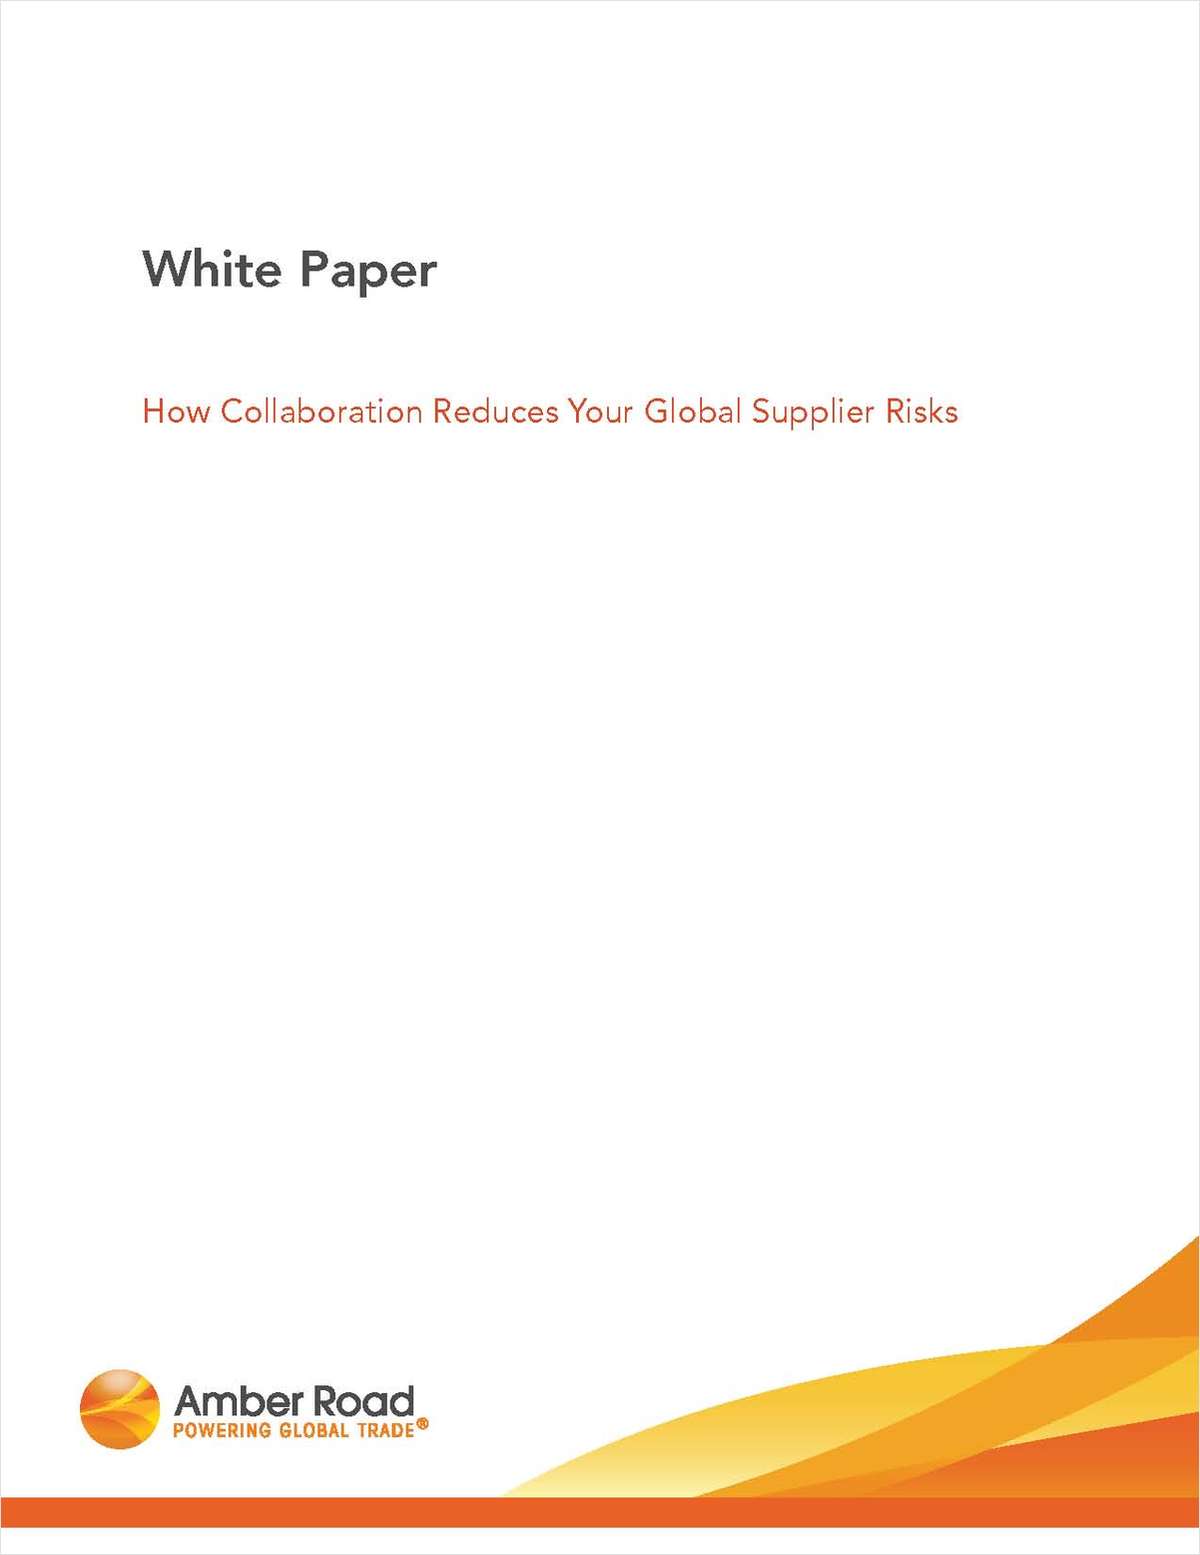 How Collaboration Reduces Your Global Supplier Risks